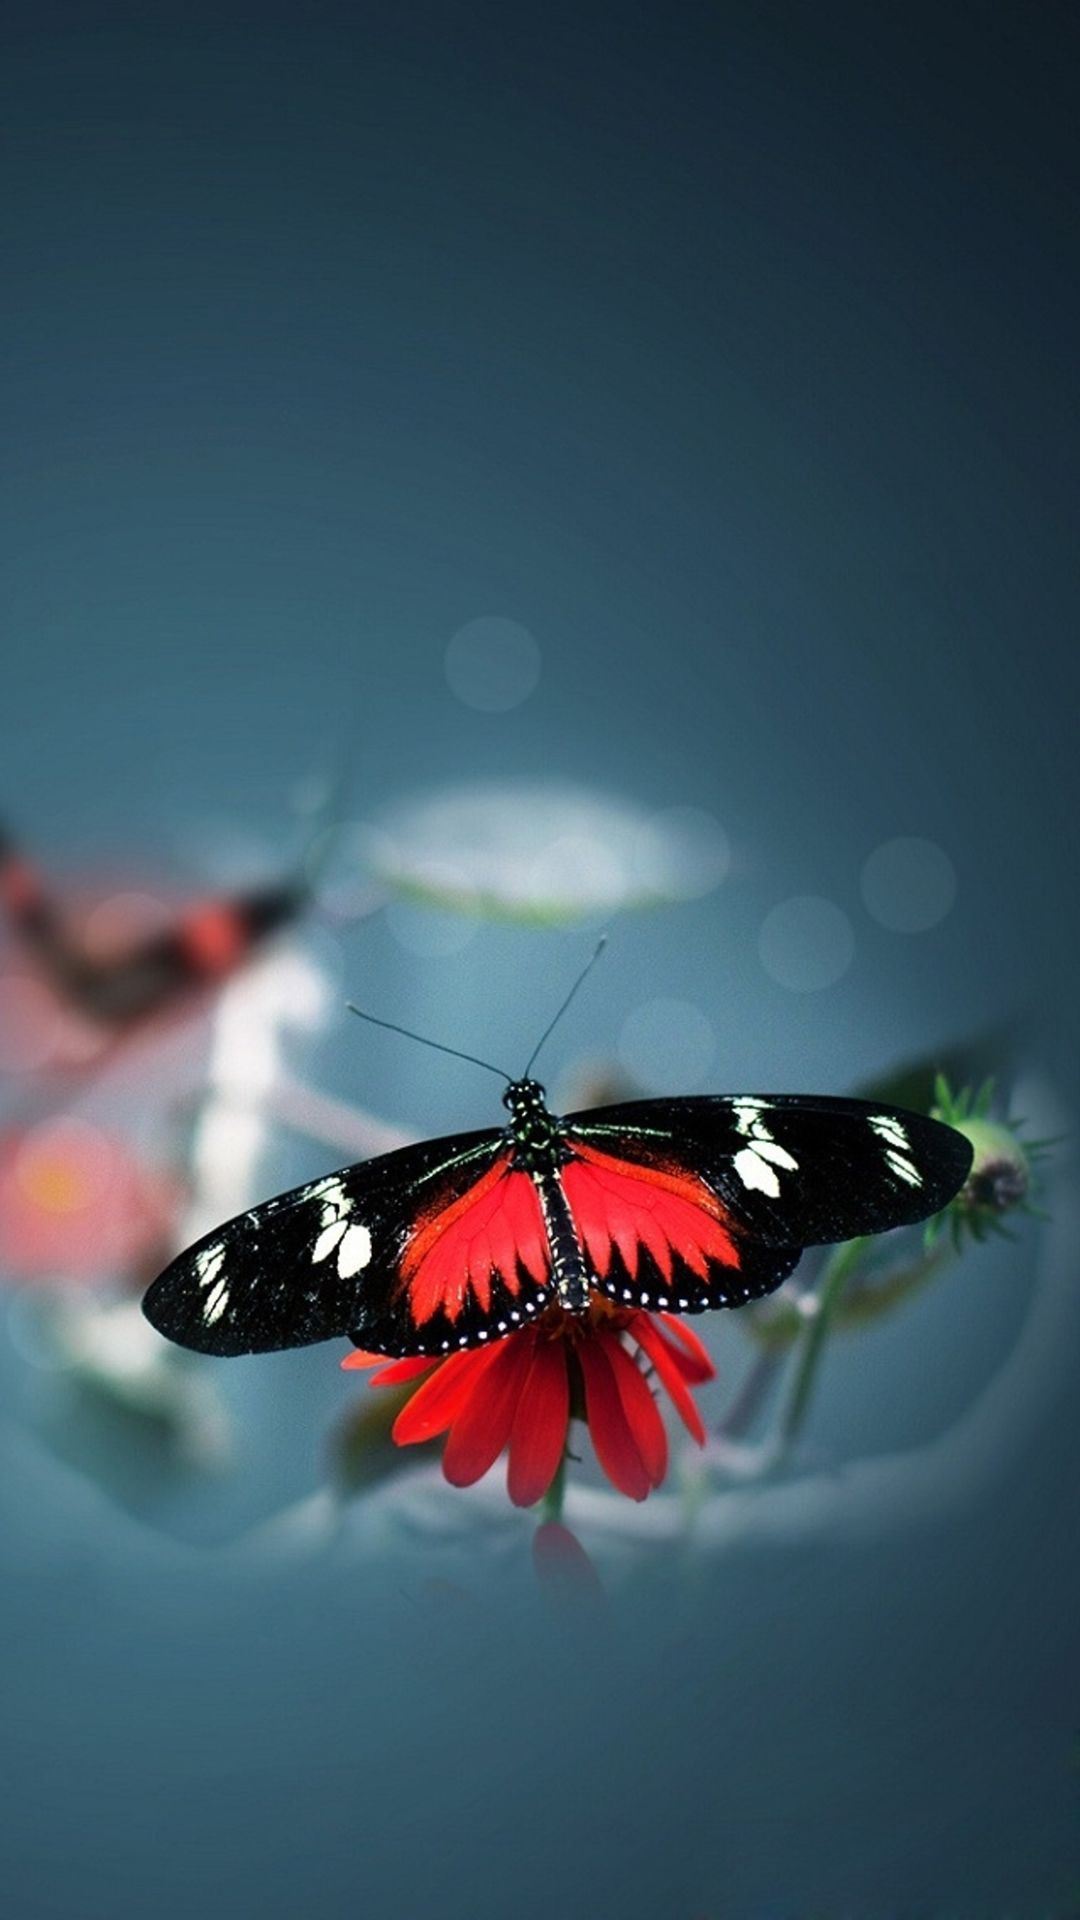 lyf mobile wallpaper hd,butterfly,nature,insect,red,moths and butterflies